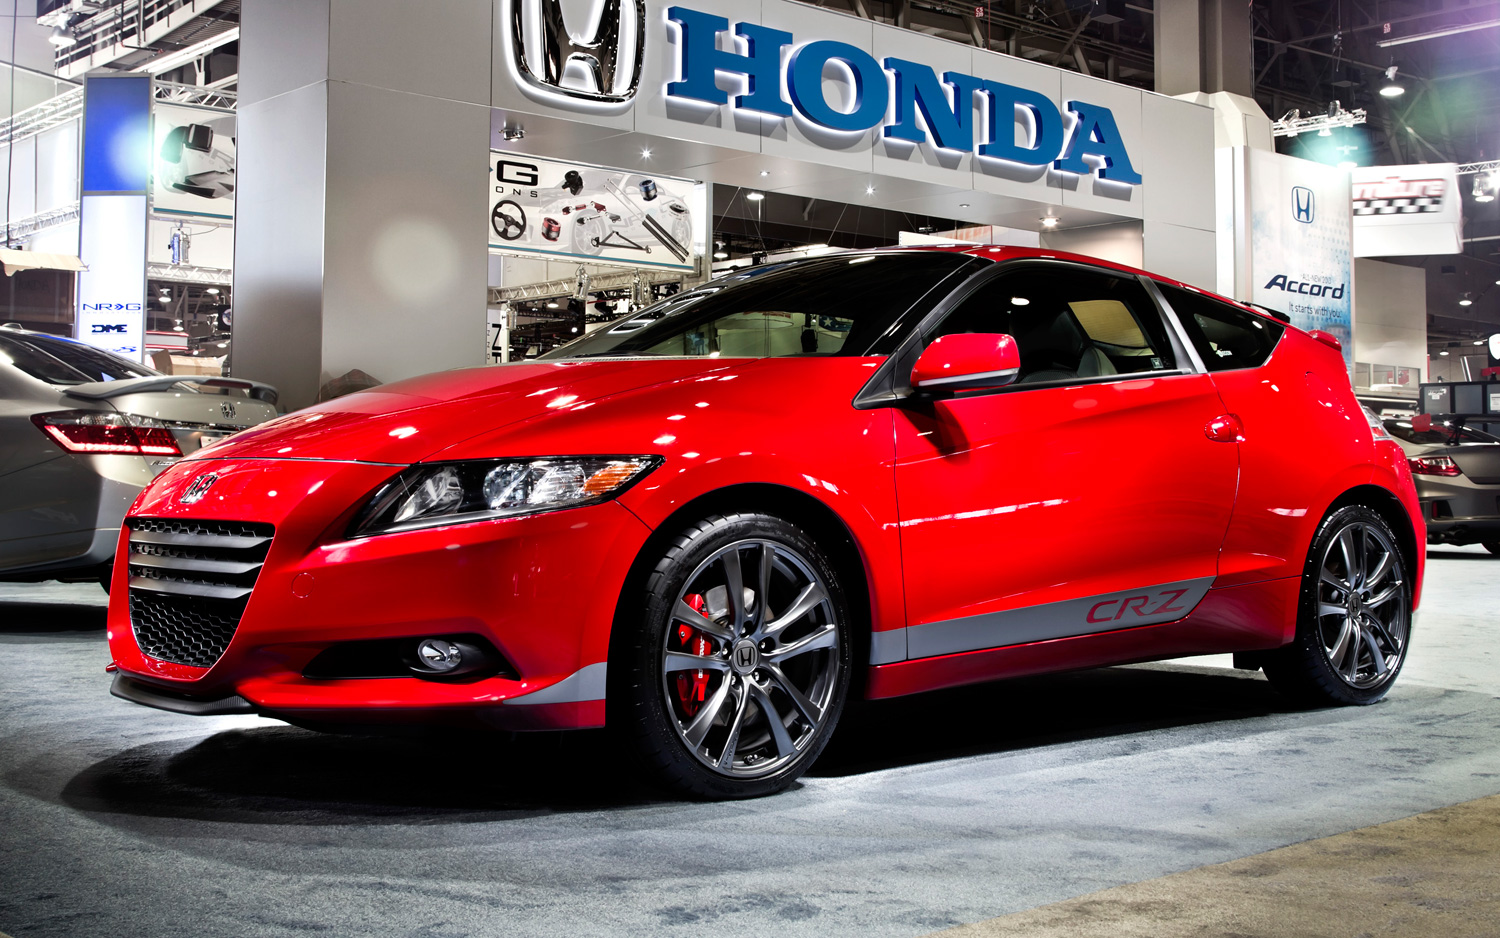 Supercharged Honda CR-Z | New cars reviews